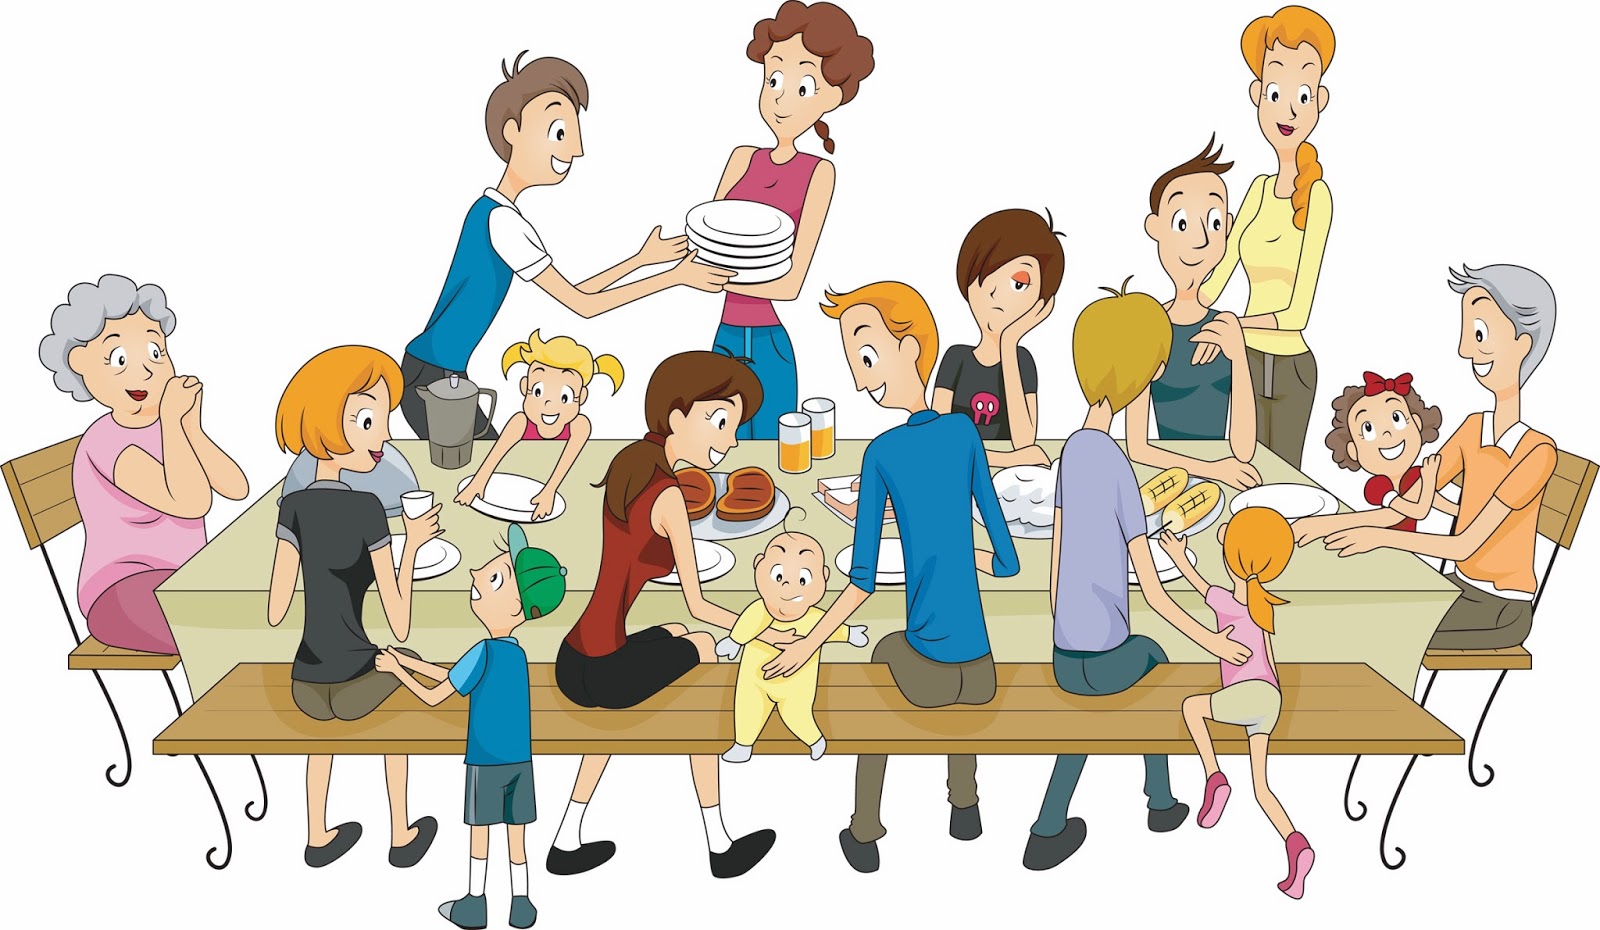 Family clip art free free clipart image 4 clipartcow 